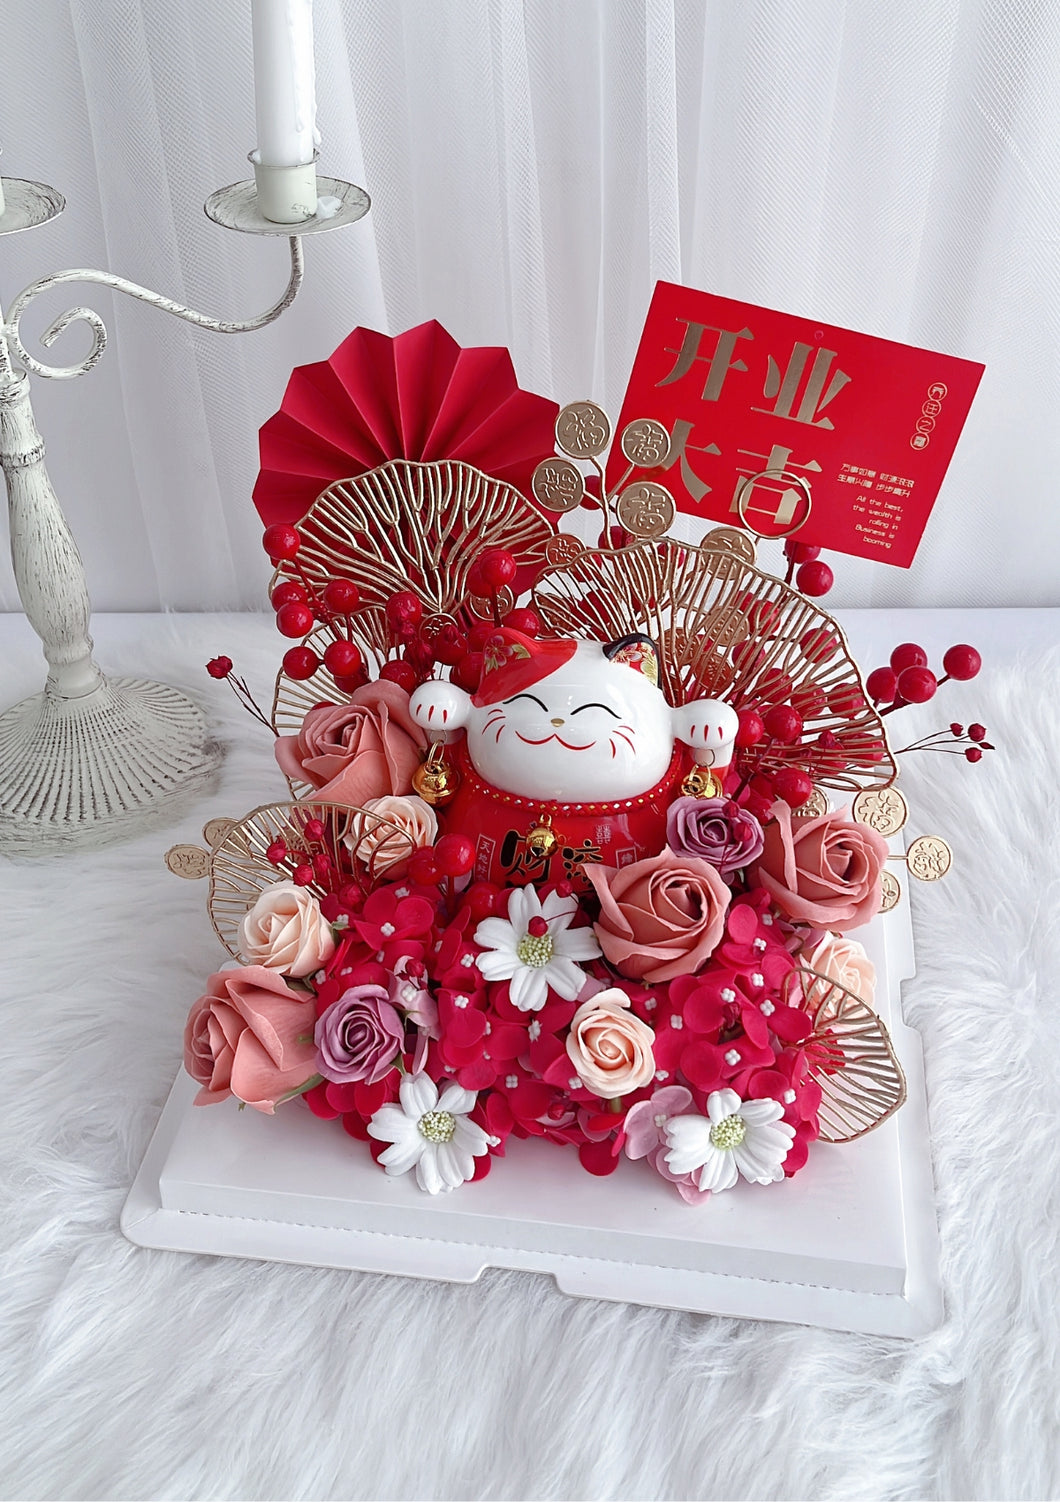 Red Fortune Cat with Red Soap Flower Box 招财猫红色系蛋糕香皂花礼盒